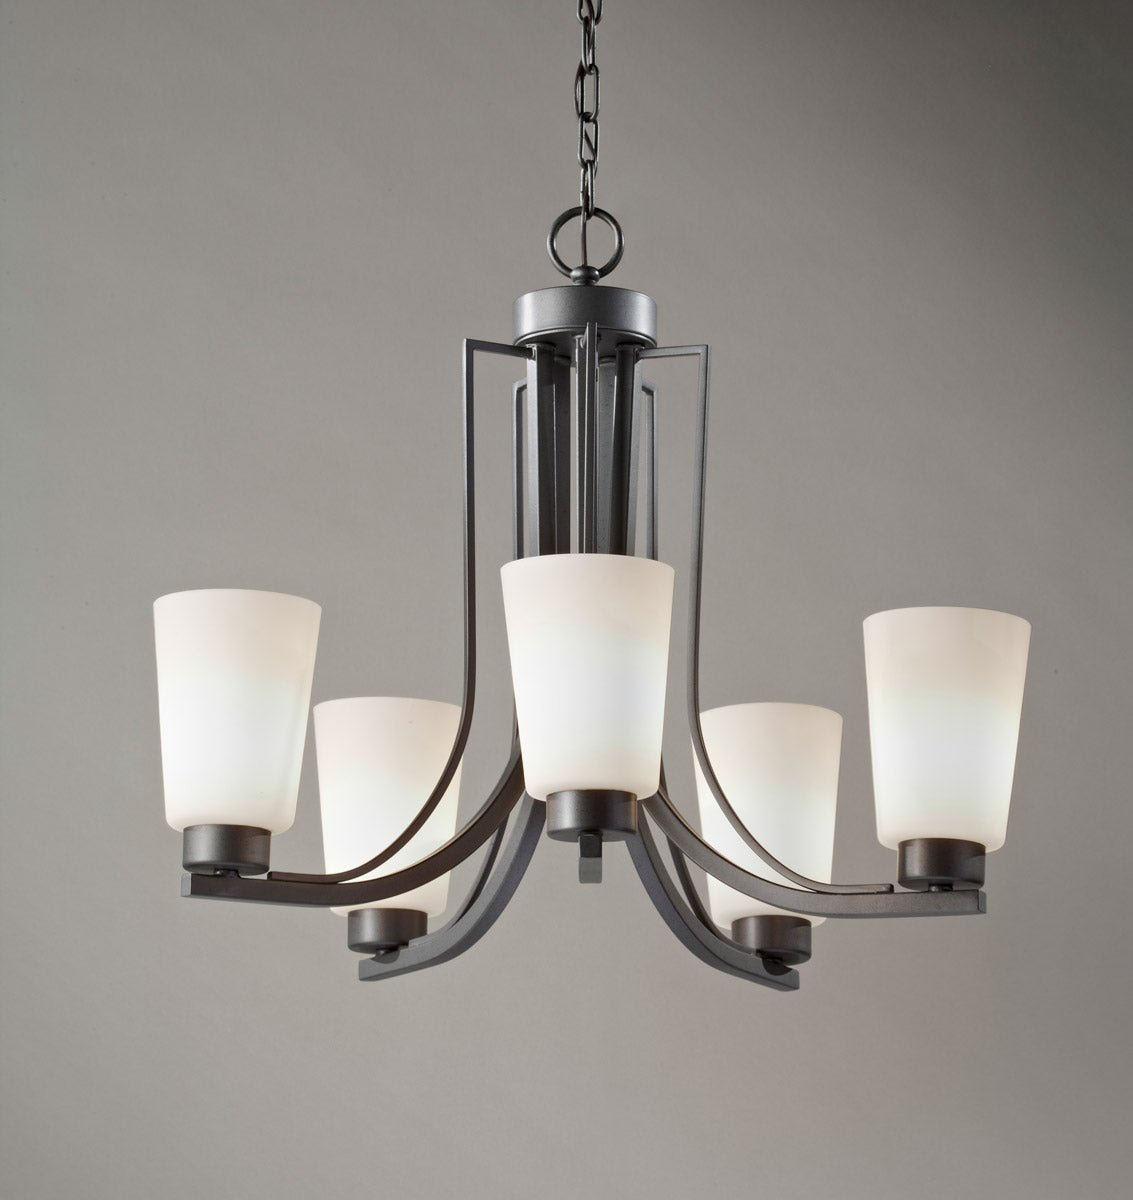 Feiss Weston 5 Light Chandelier in Colonial Iron F2761/5CI